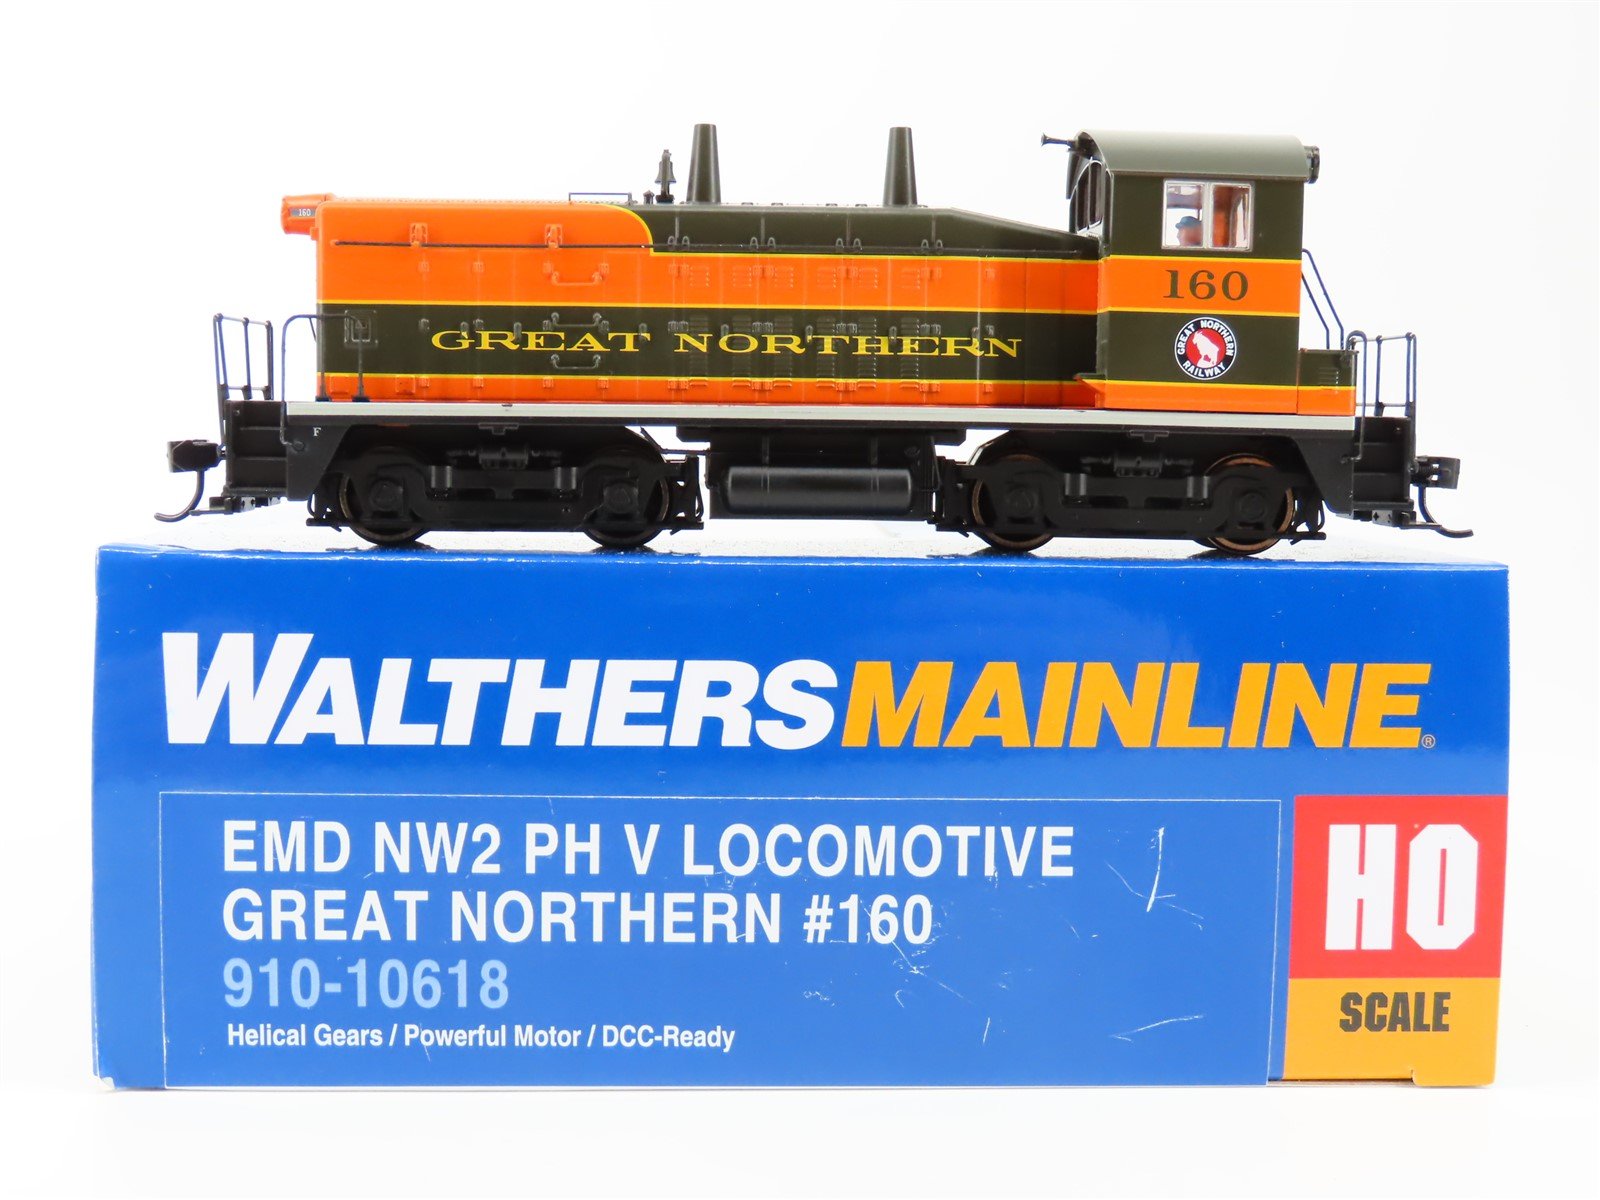 HO Walthers Mainline 910-10618 GN Great Northern NW2 Diesel #160 - DCC Ready